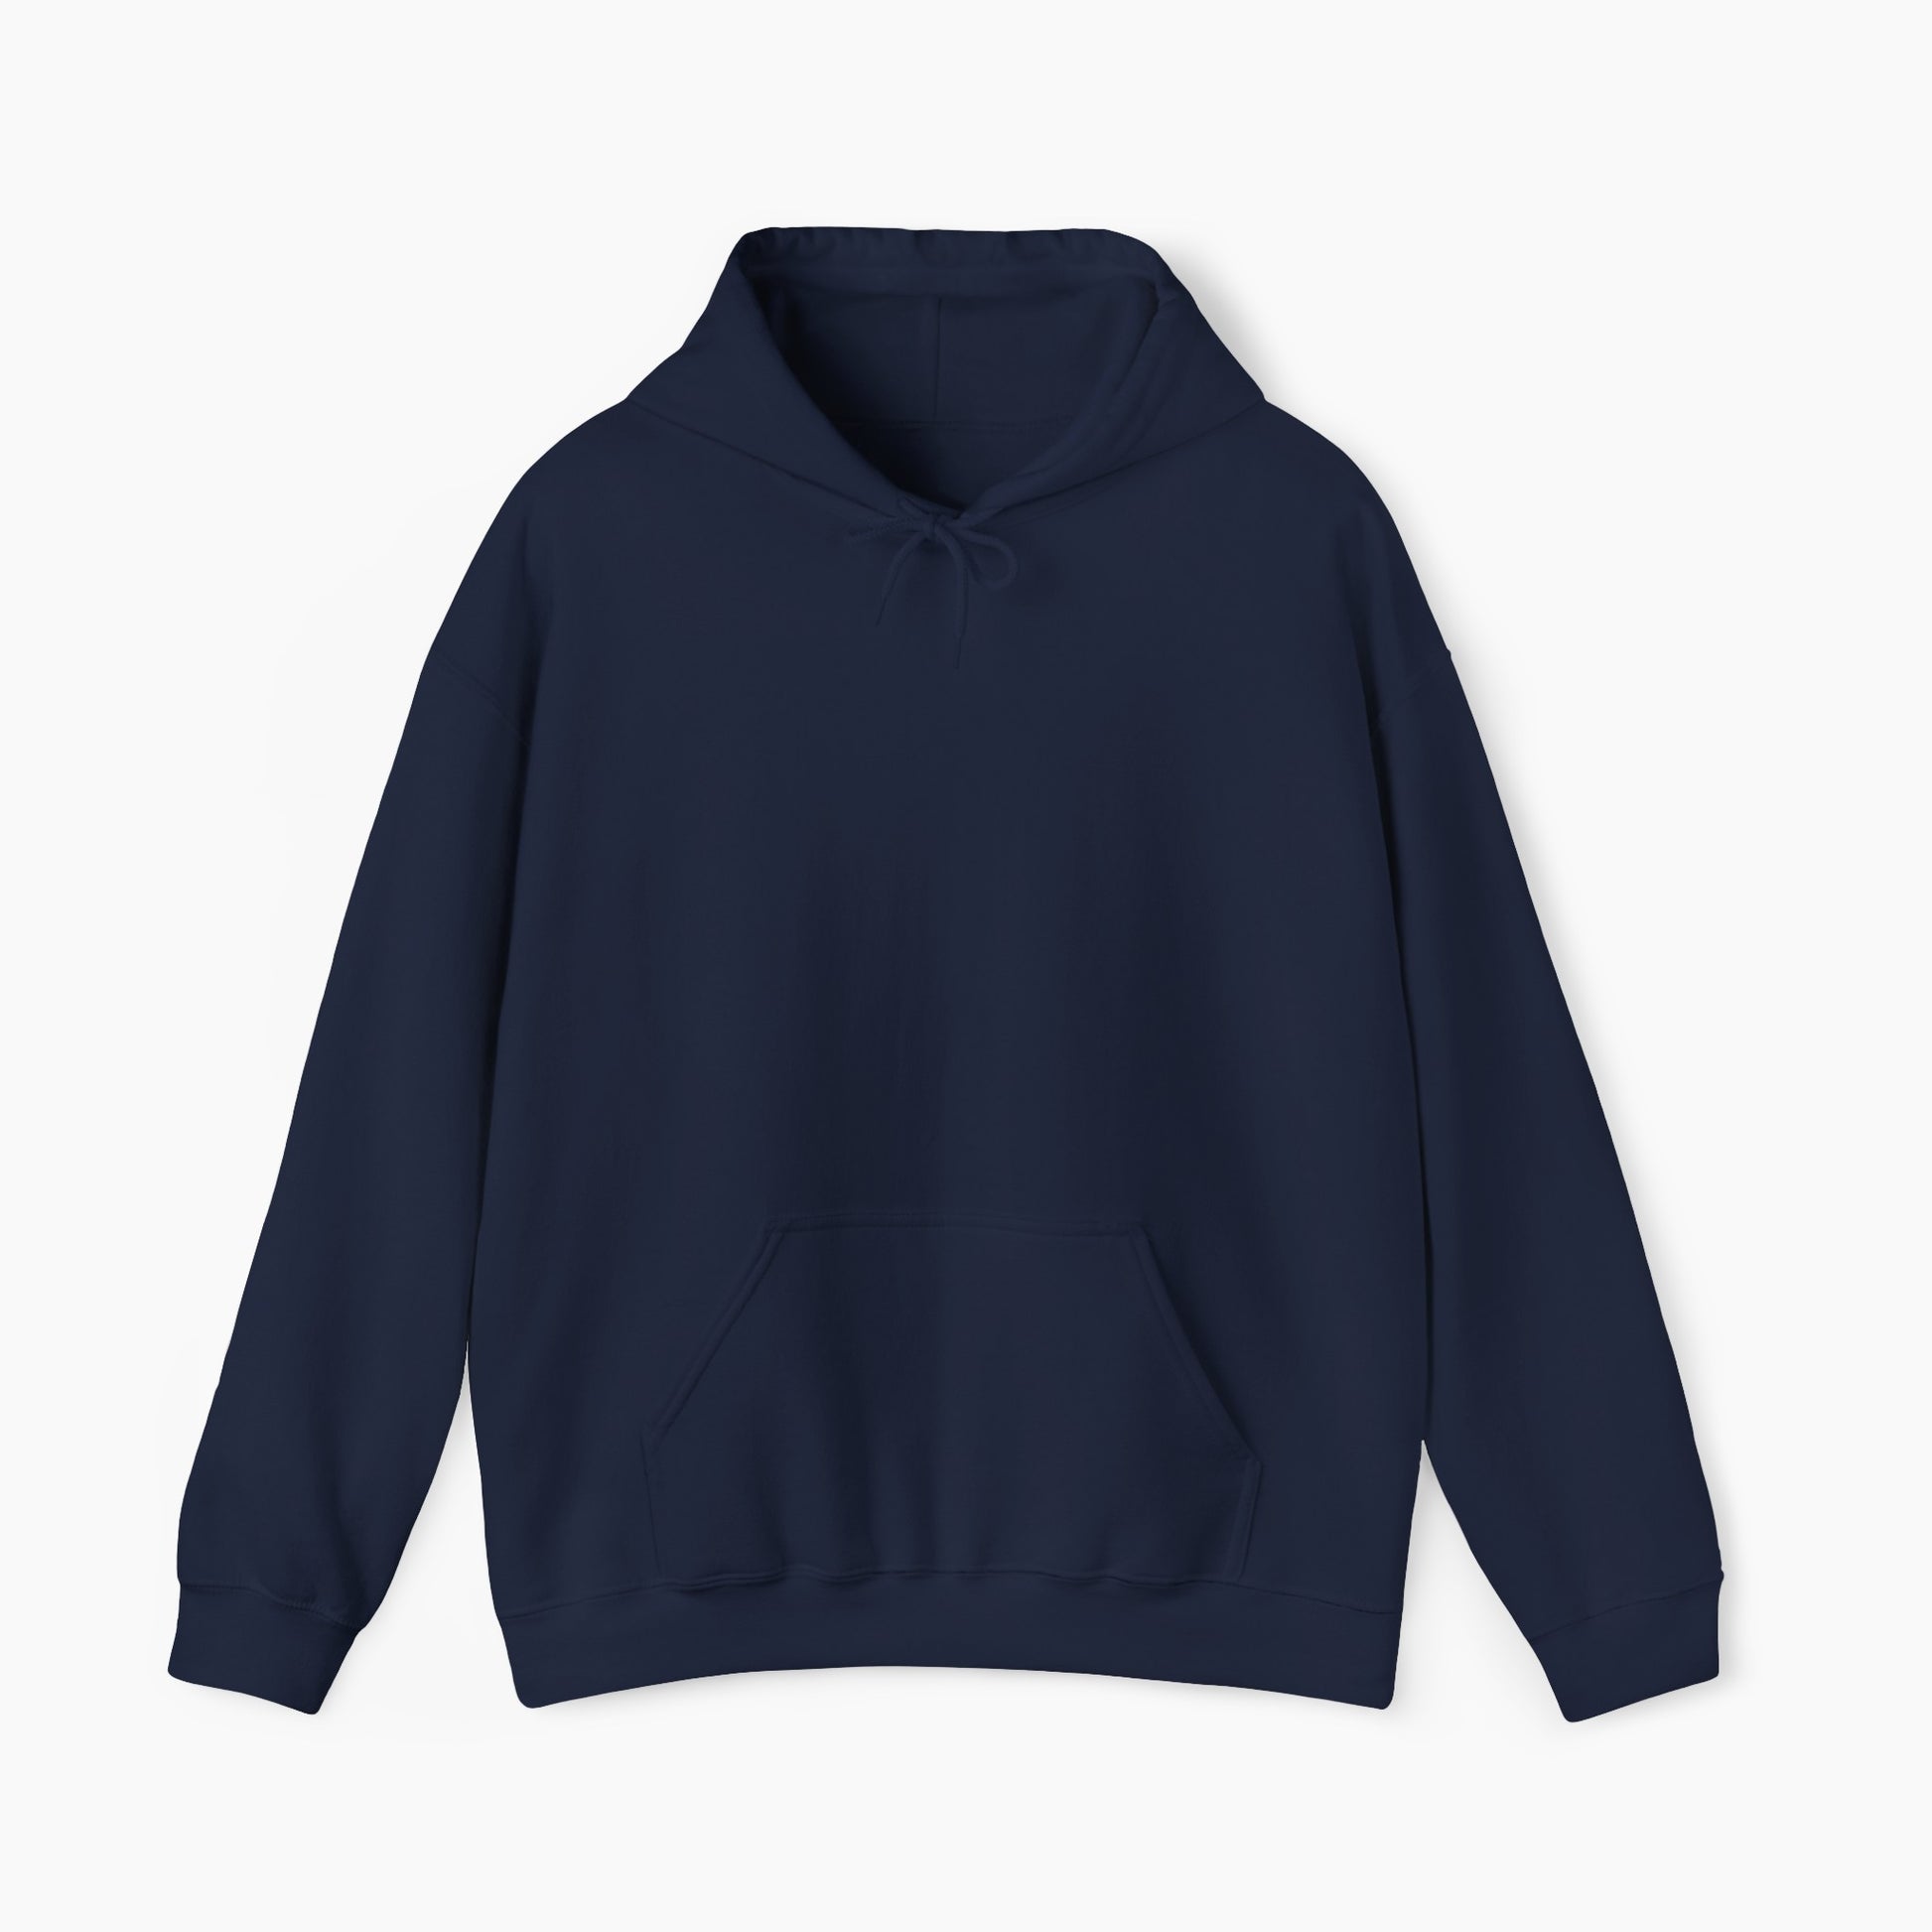 Front view of a plain dark blue hoodie on a plain background.